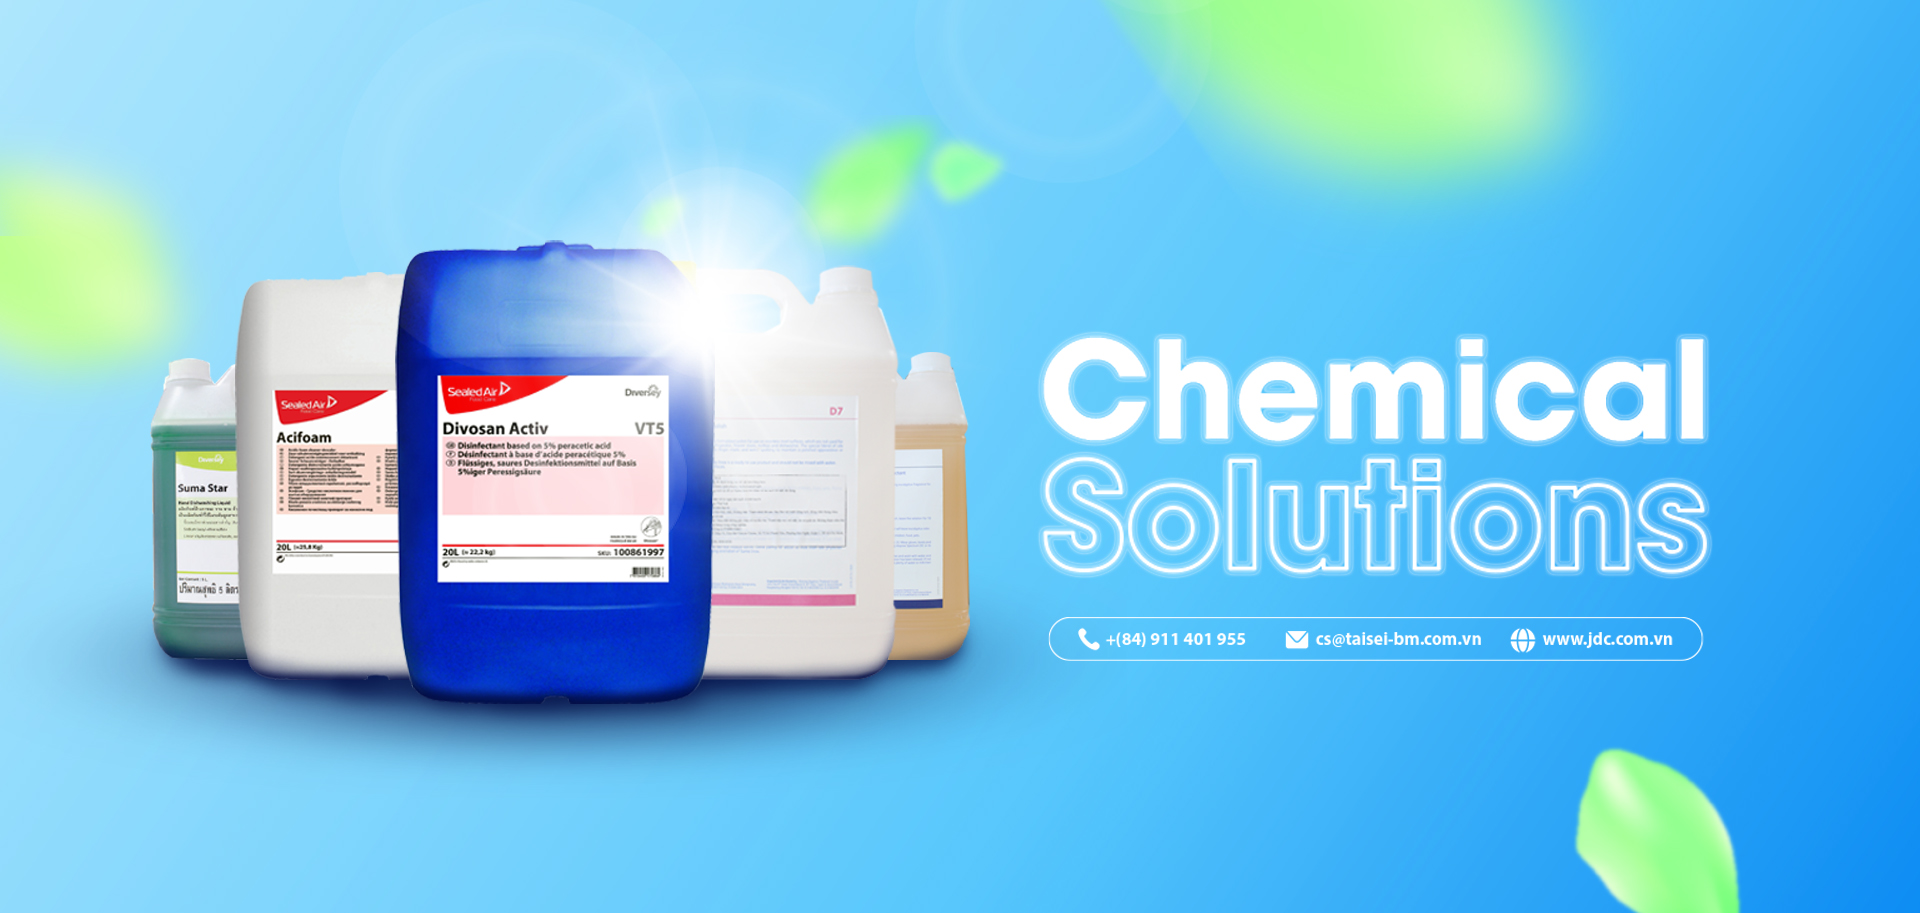 JD&C DISINFECTANT SPRAY SERVICE – OPTIMAL SOLUTION FOR HEALTH PROTECTION IN DISEASE